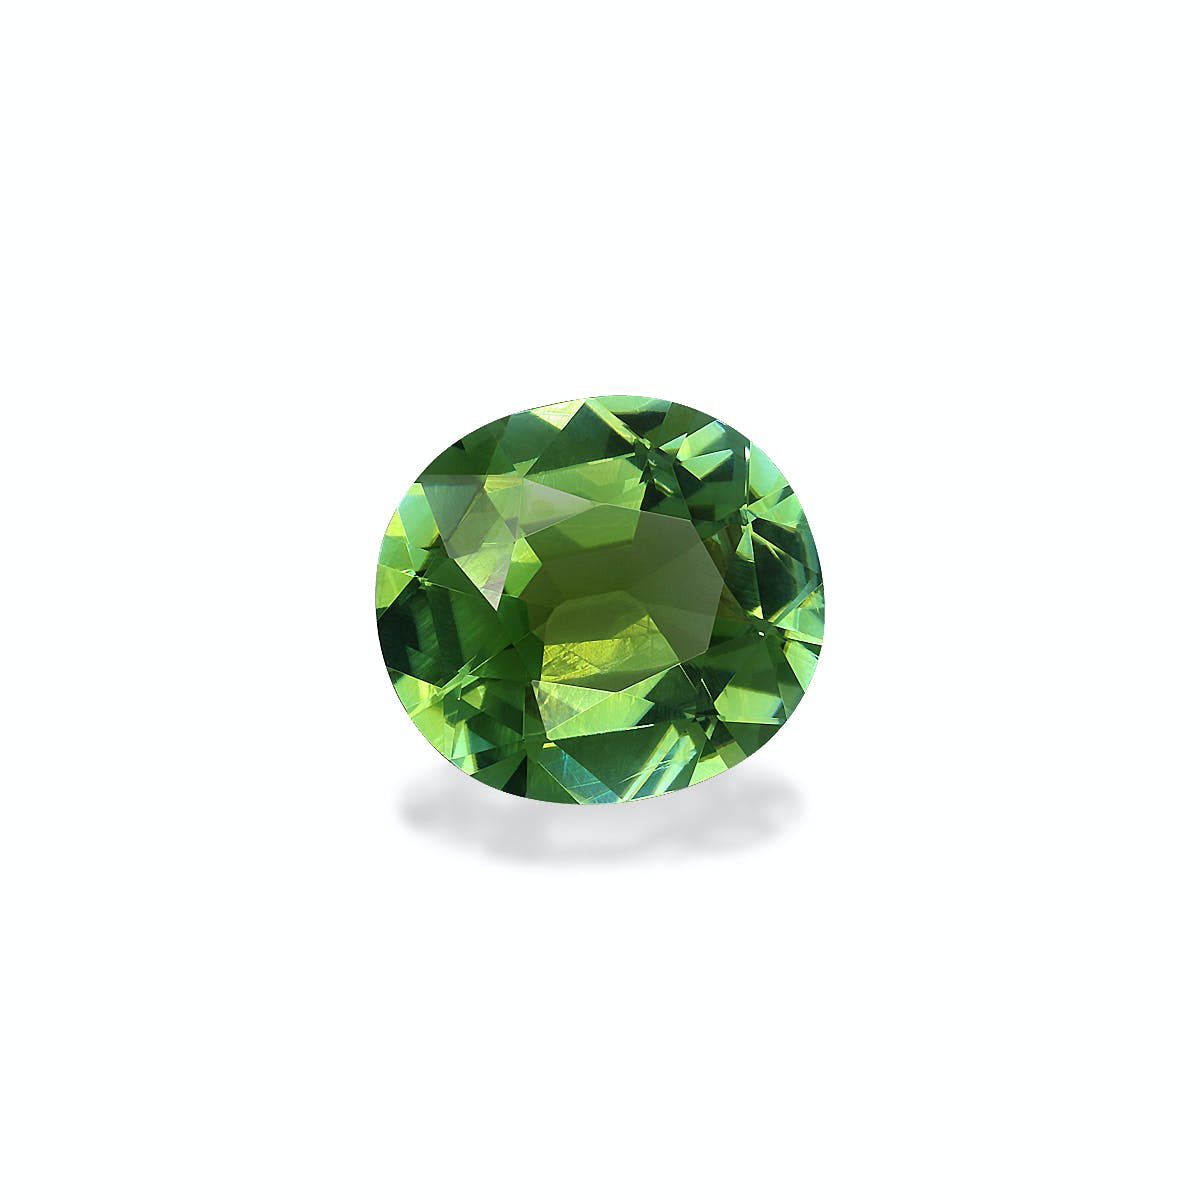 Picture of Green Tourmaline 4.10ct - 12x10mm (TG1405)